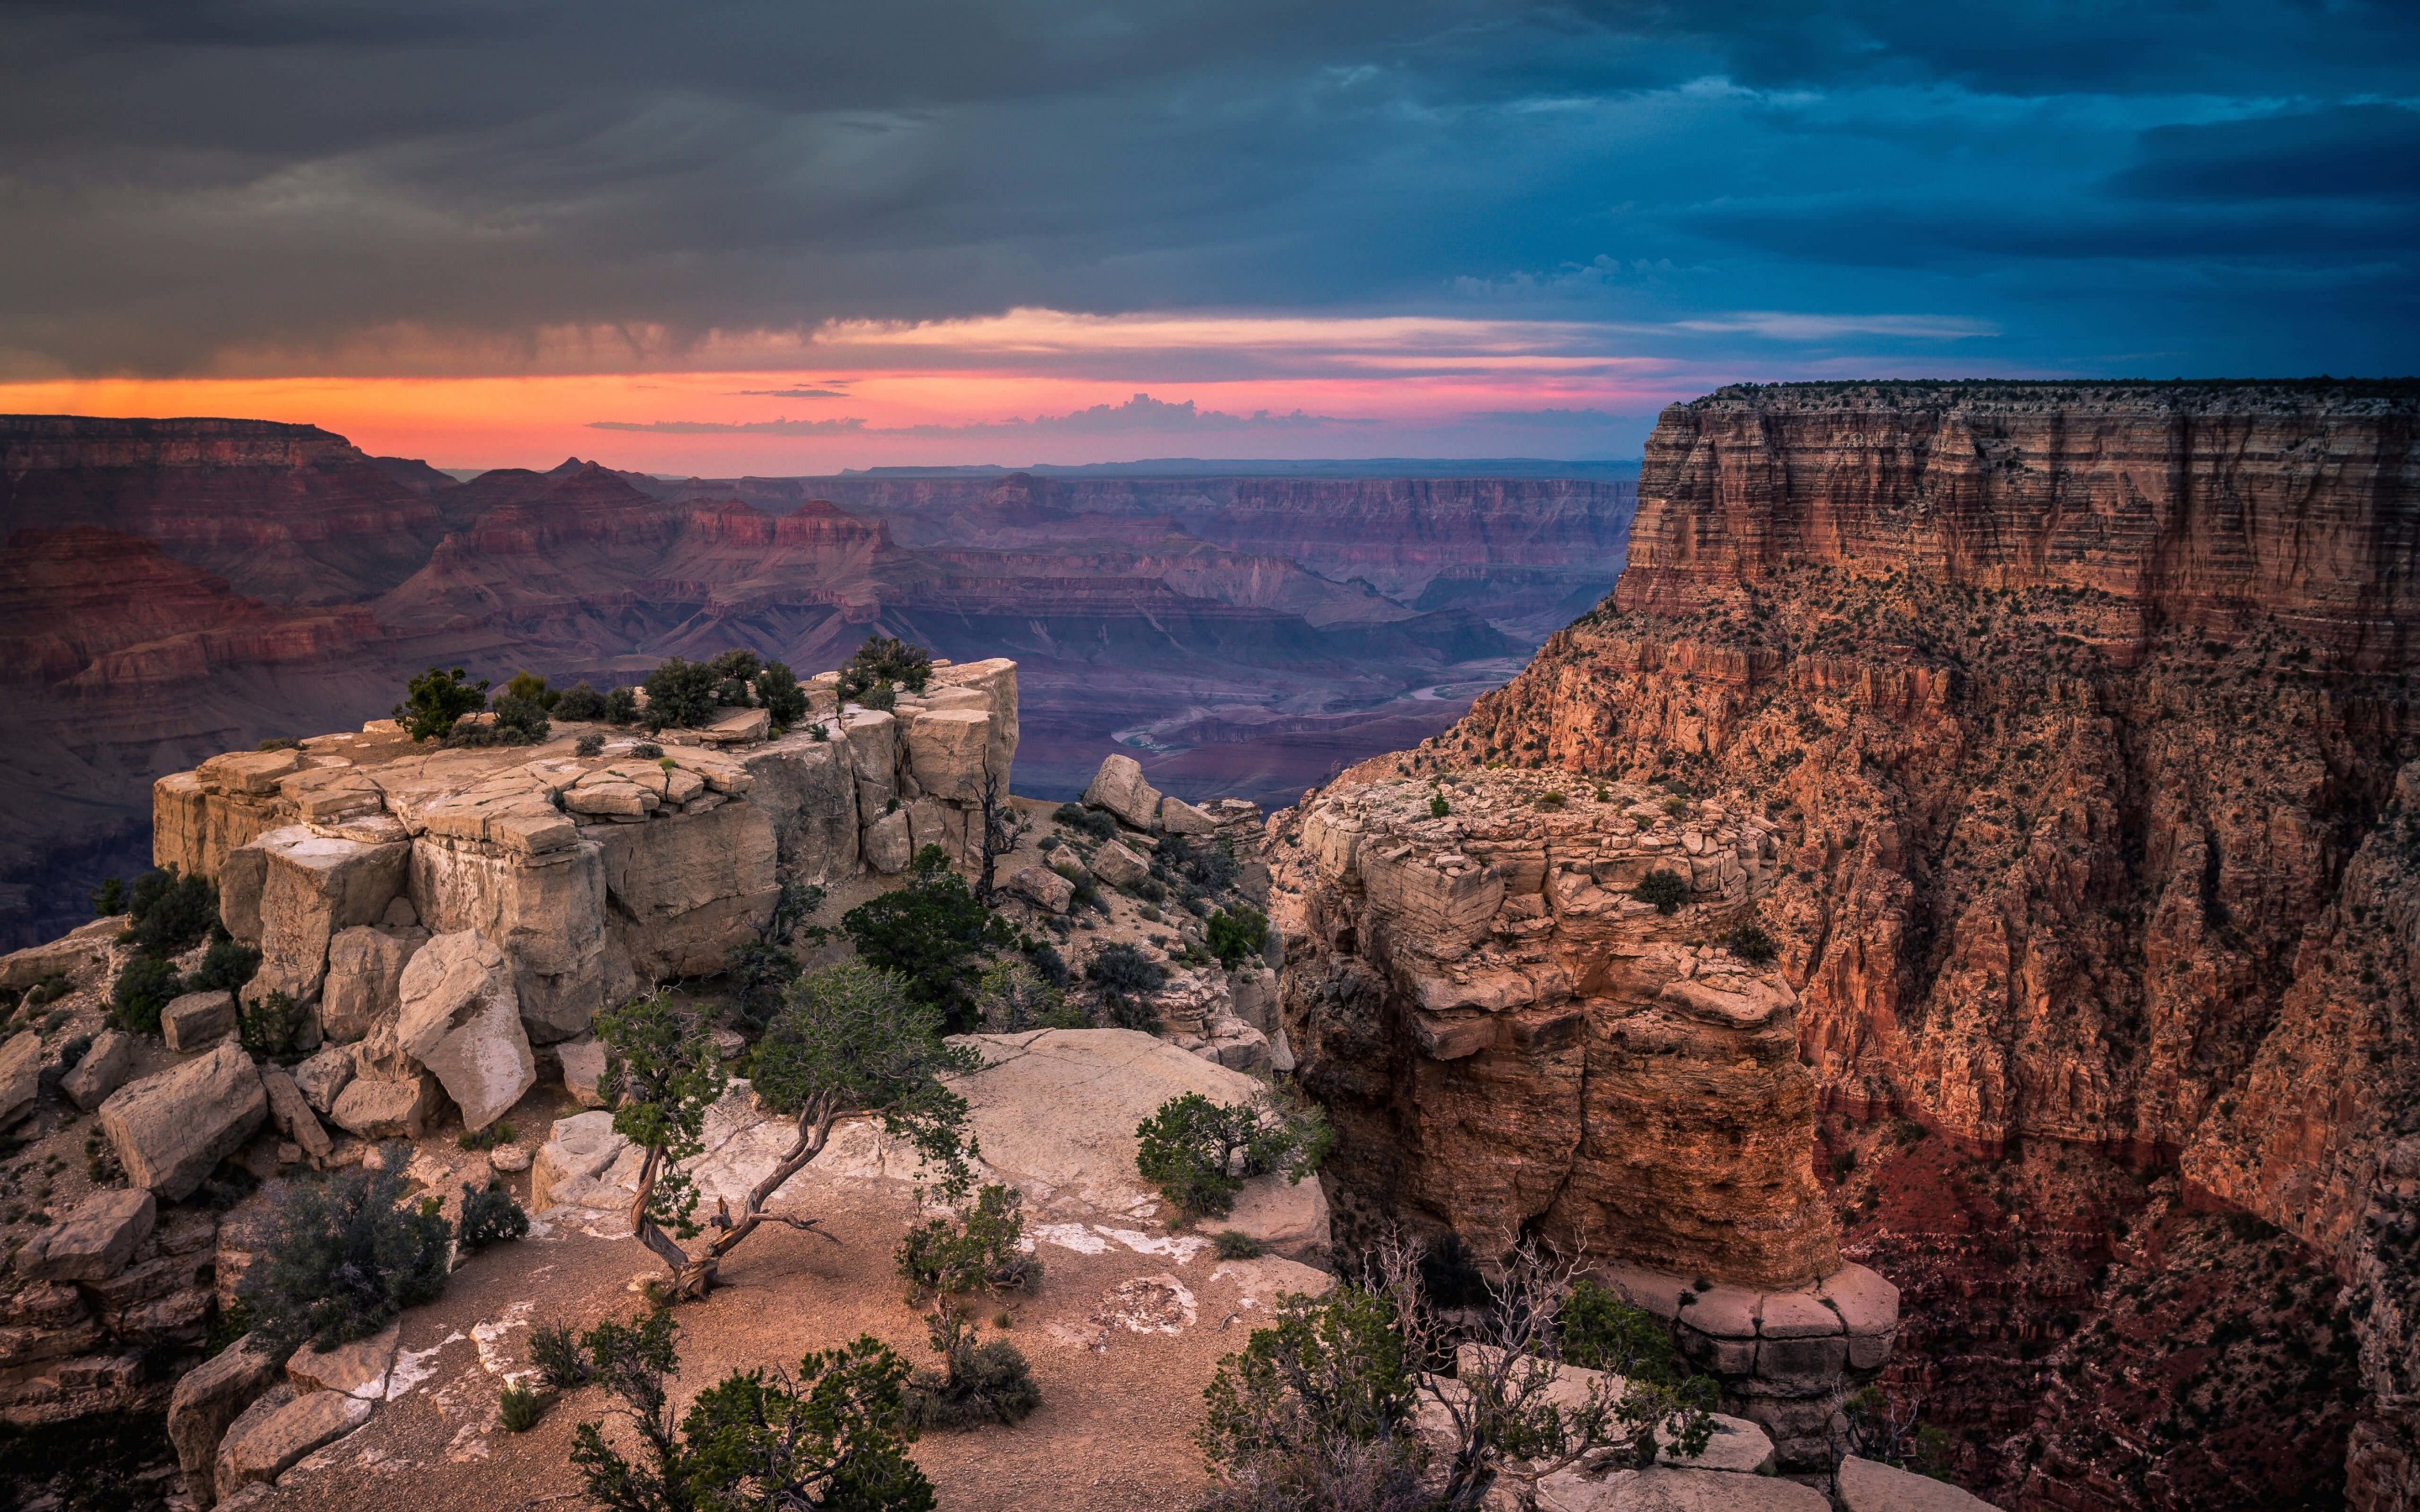 Sunset At The Grand Canyon Wallpaper for Desktop 2880x1800